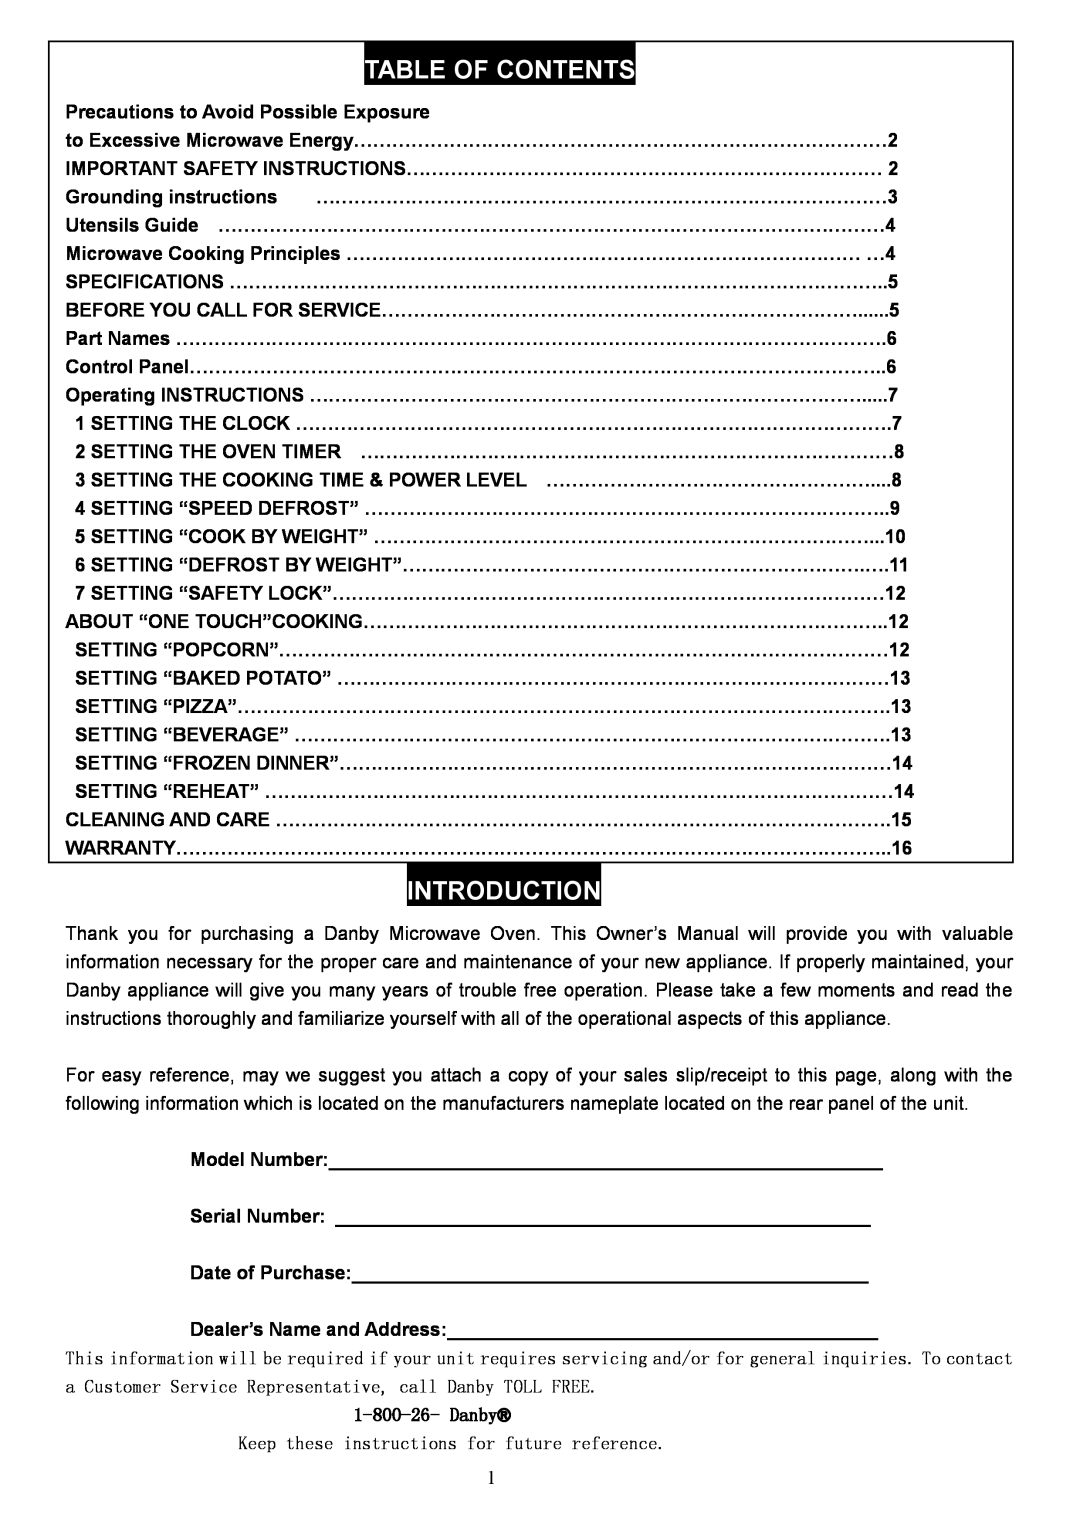 Danby DMW1048SS owner manual Table Of Contents, Introduction, Danby Keep these instructions for future reference 